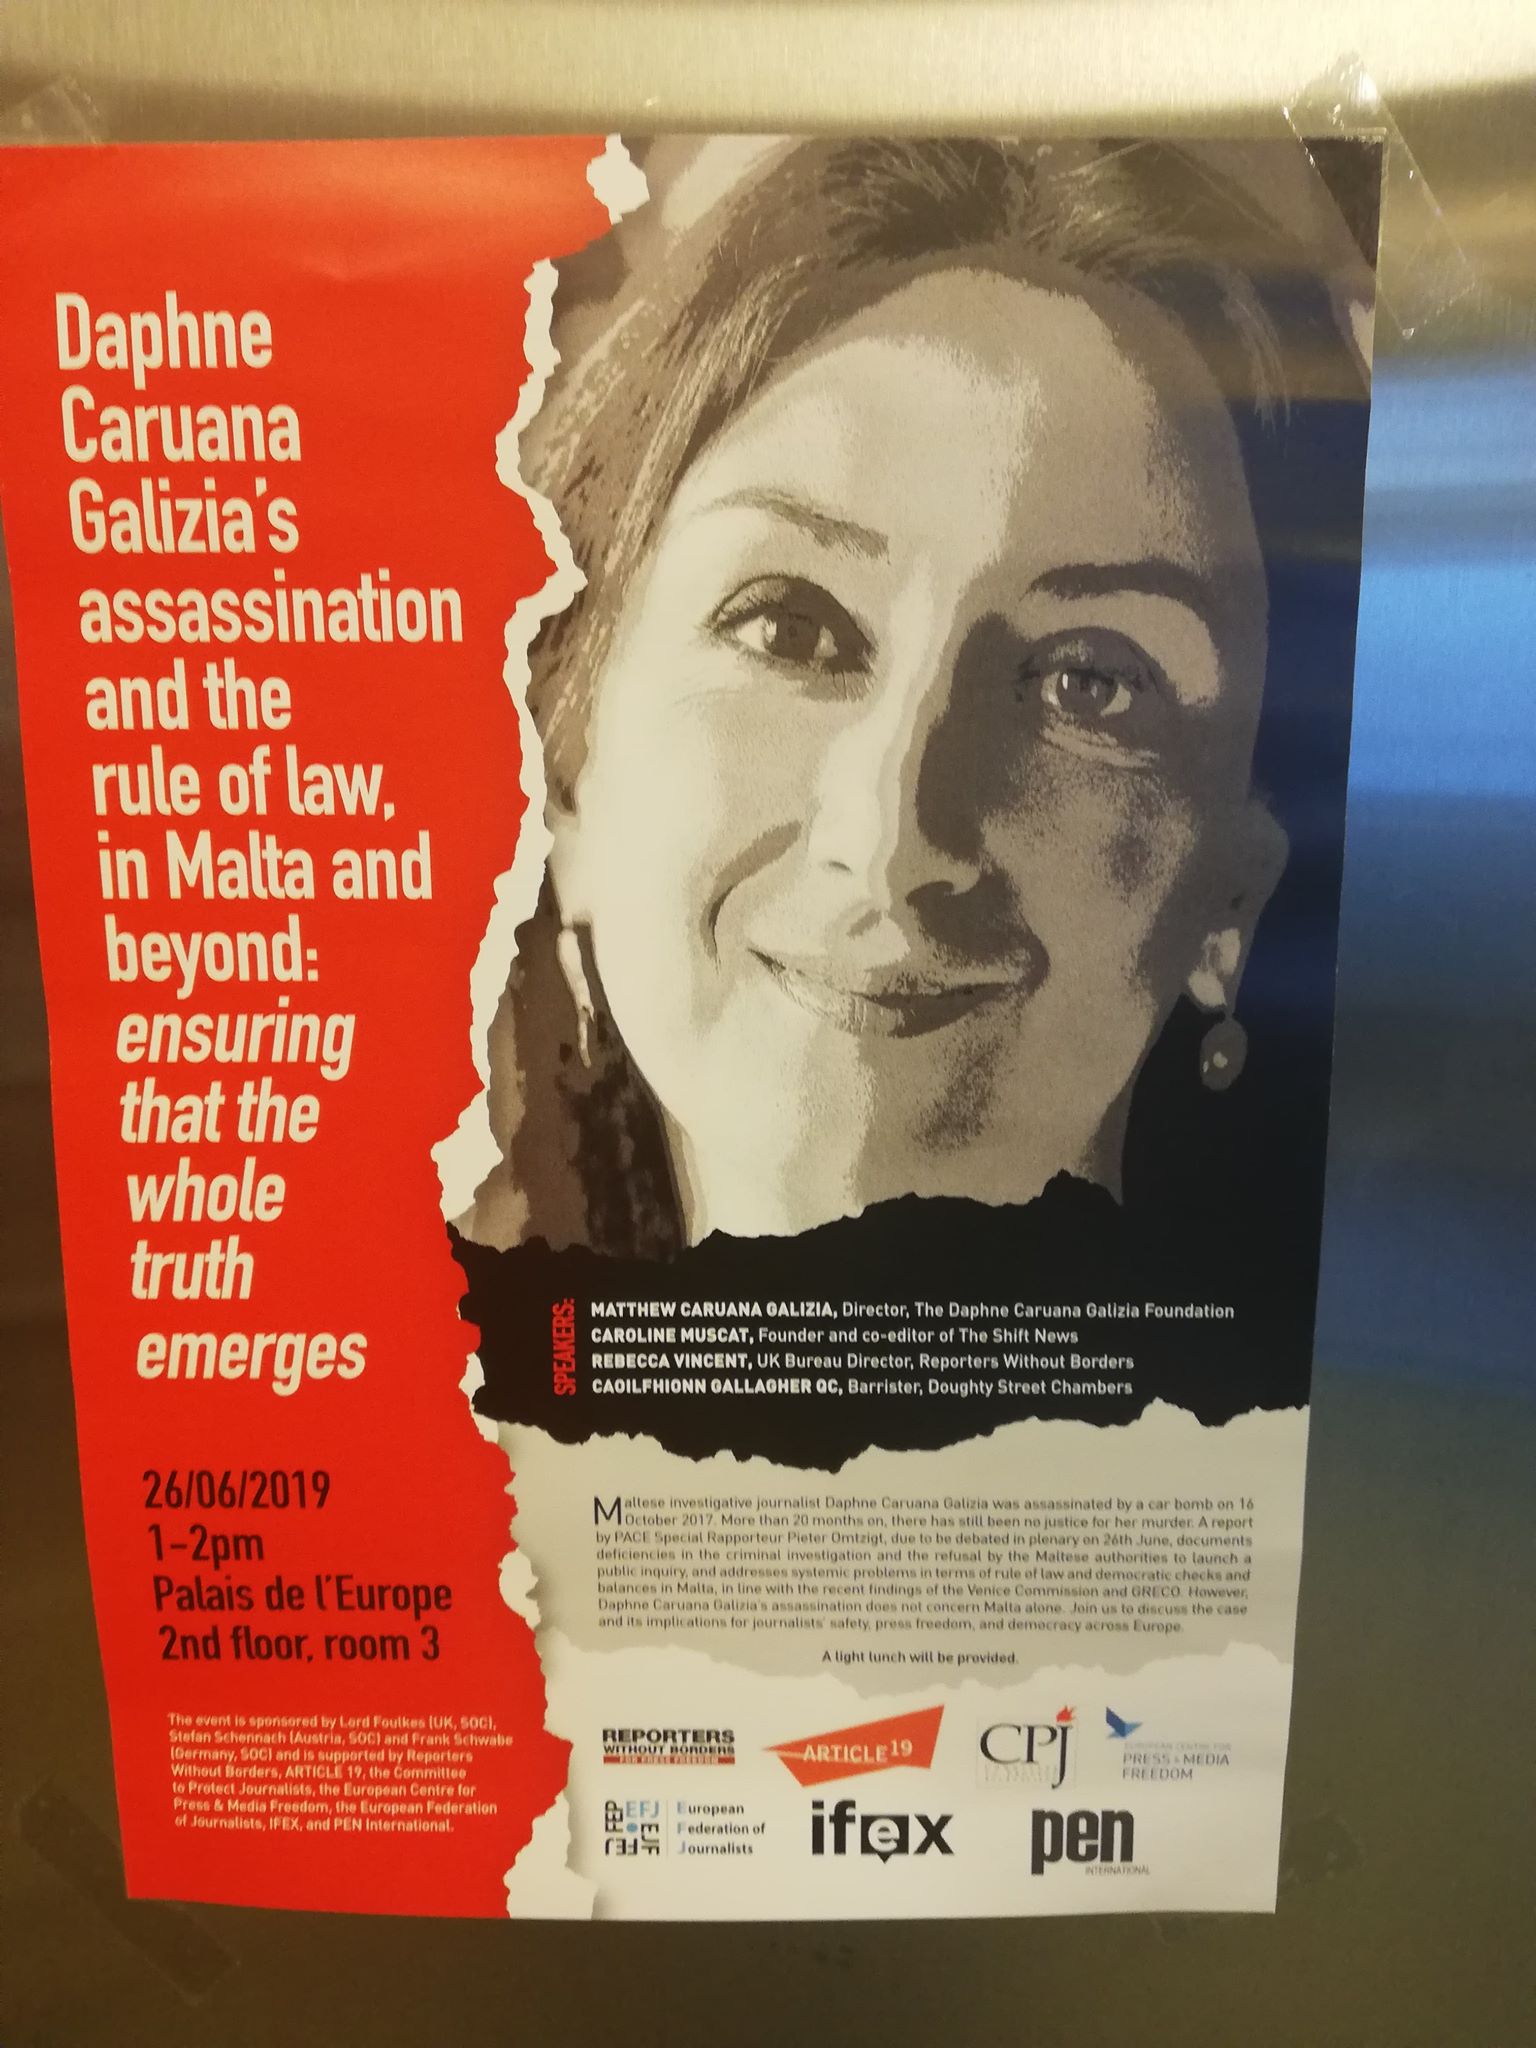 Daphne Caruana Galizia’s assassination and the rule of law in Malta and beyond: ensuring that the whole truth emerges